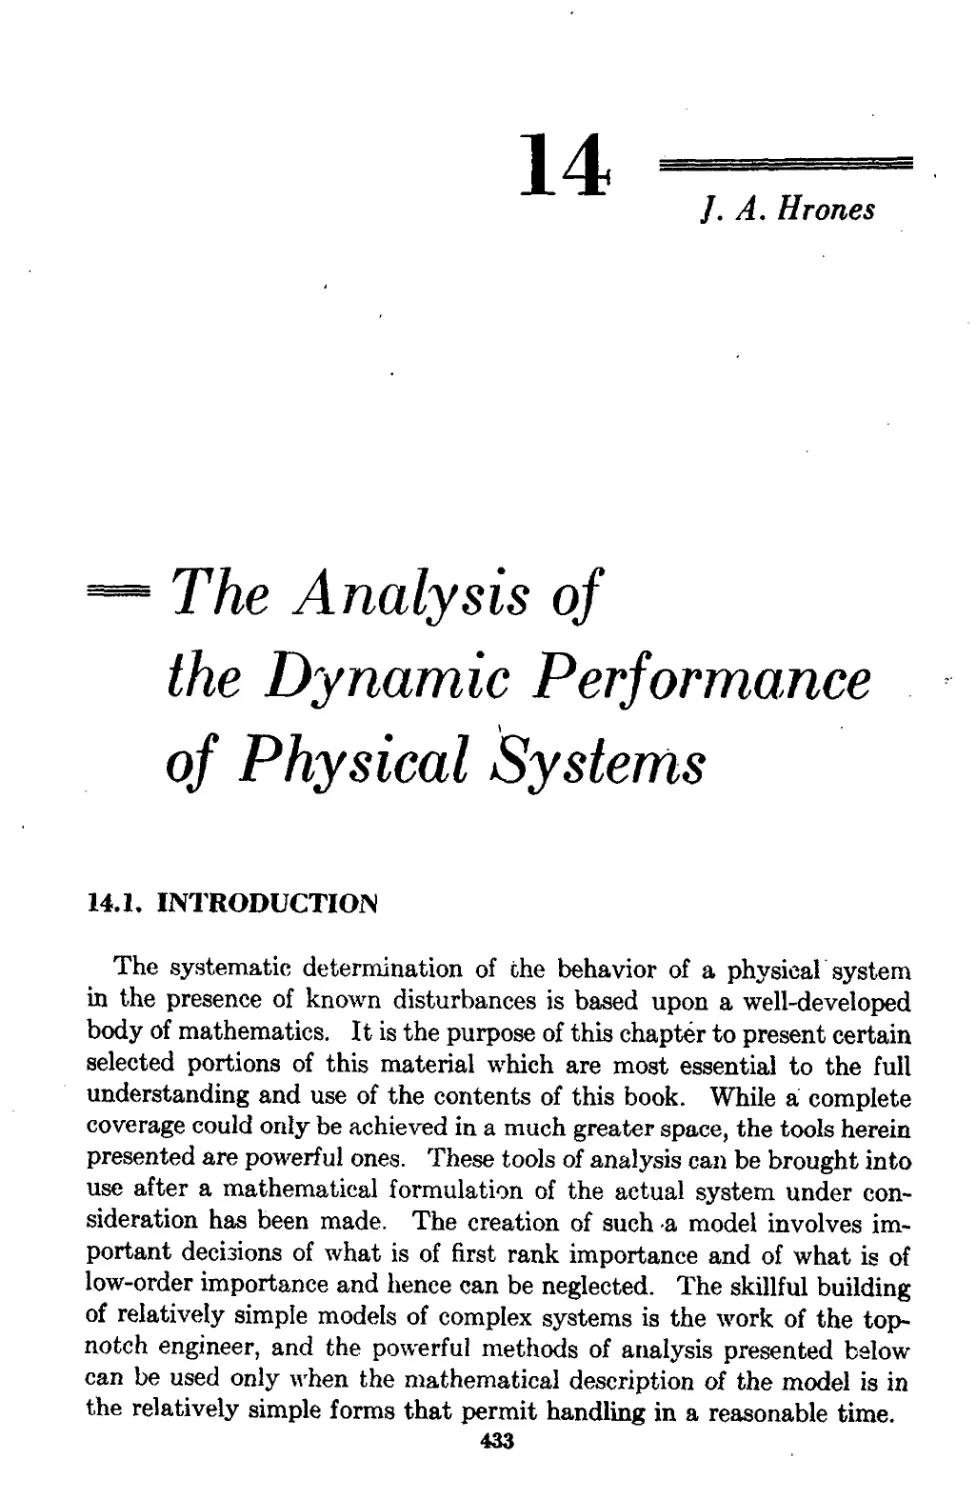 Chapter 14 The Analysis of the Dynamic Performance of Physical Systems: J. A. Hrones